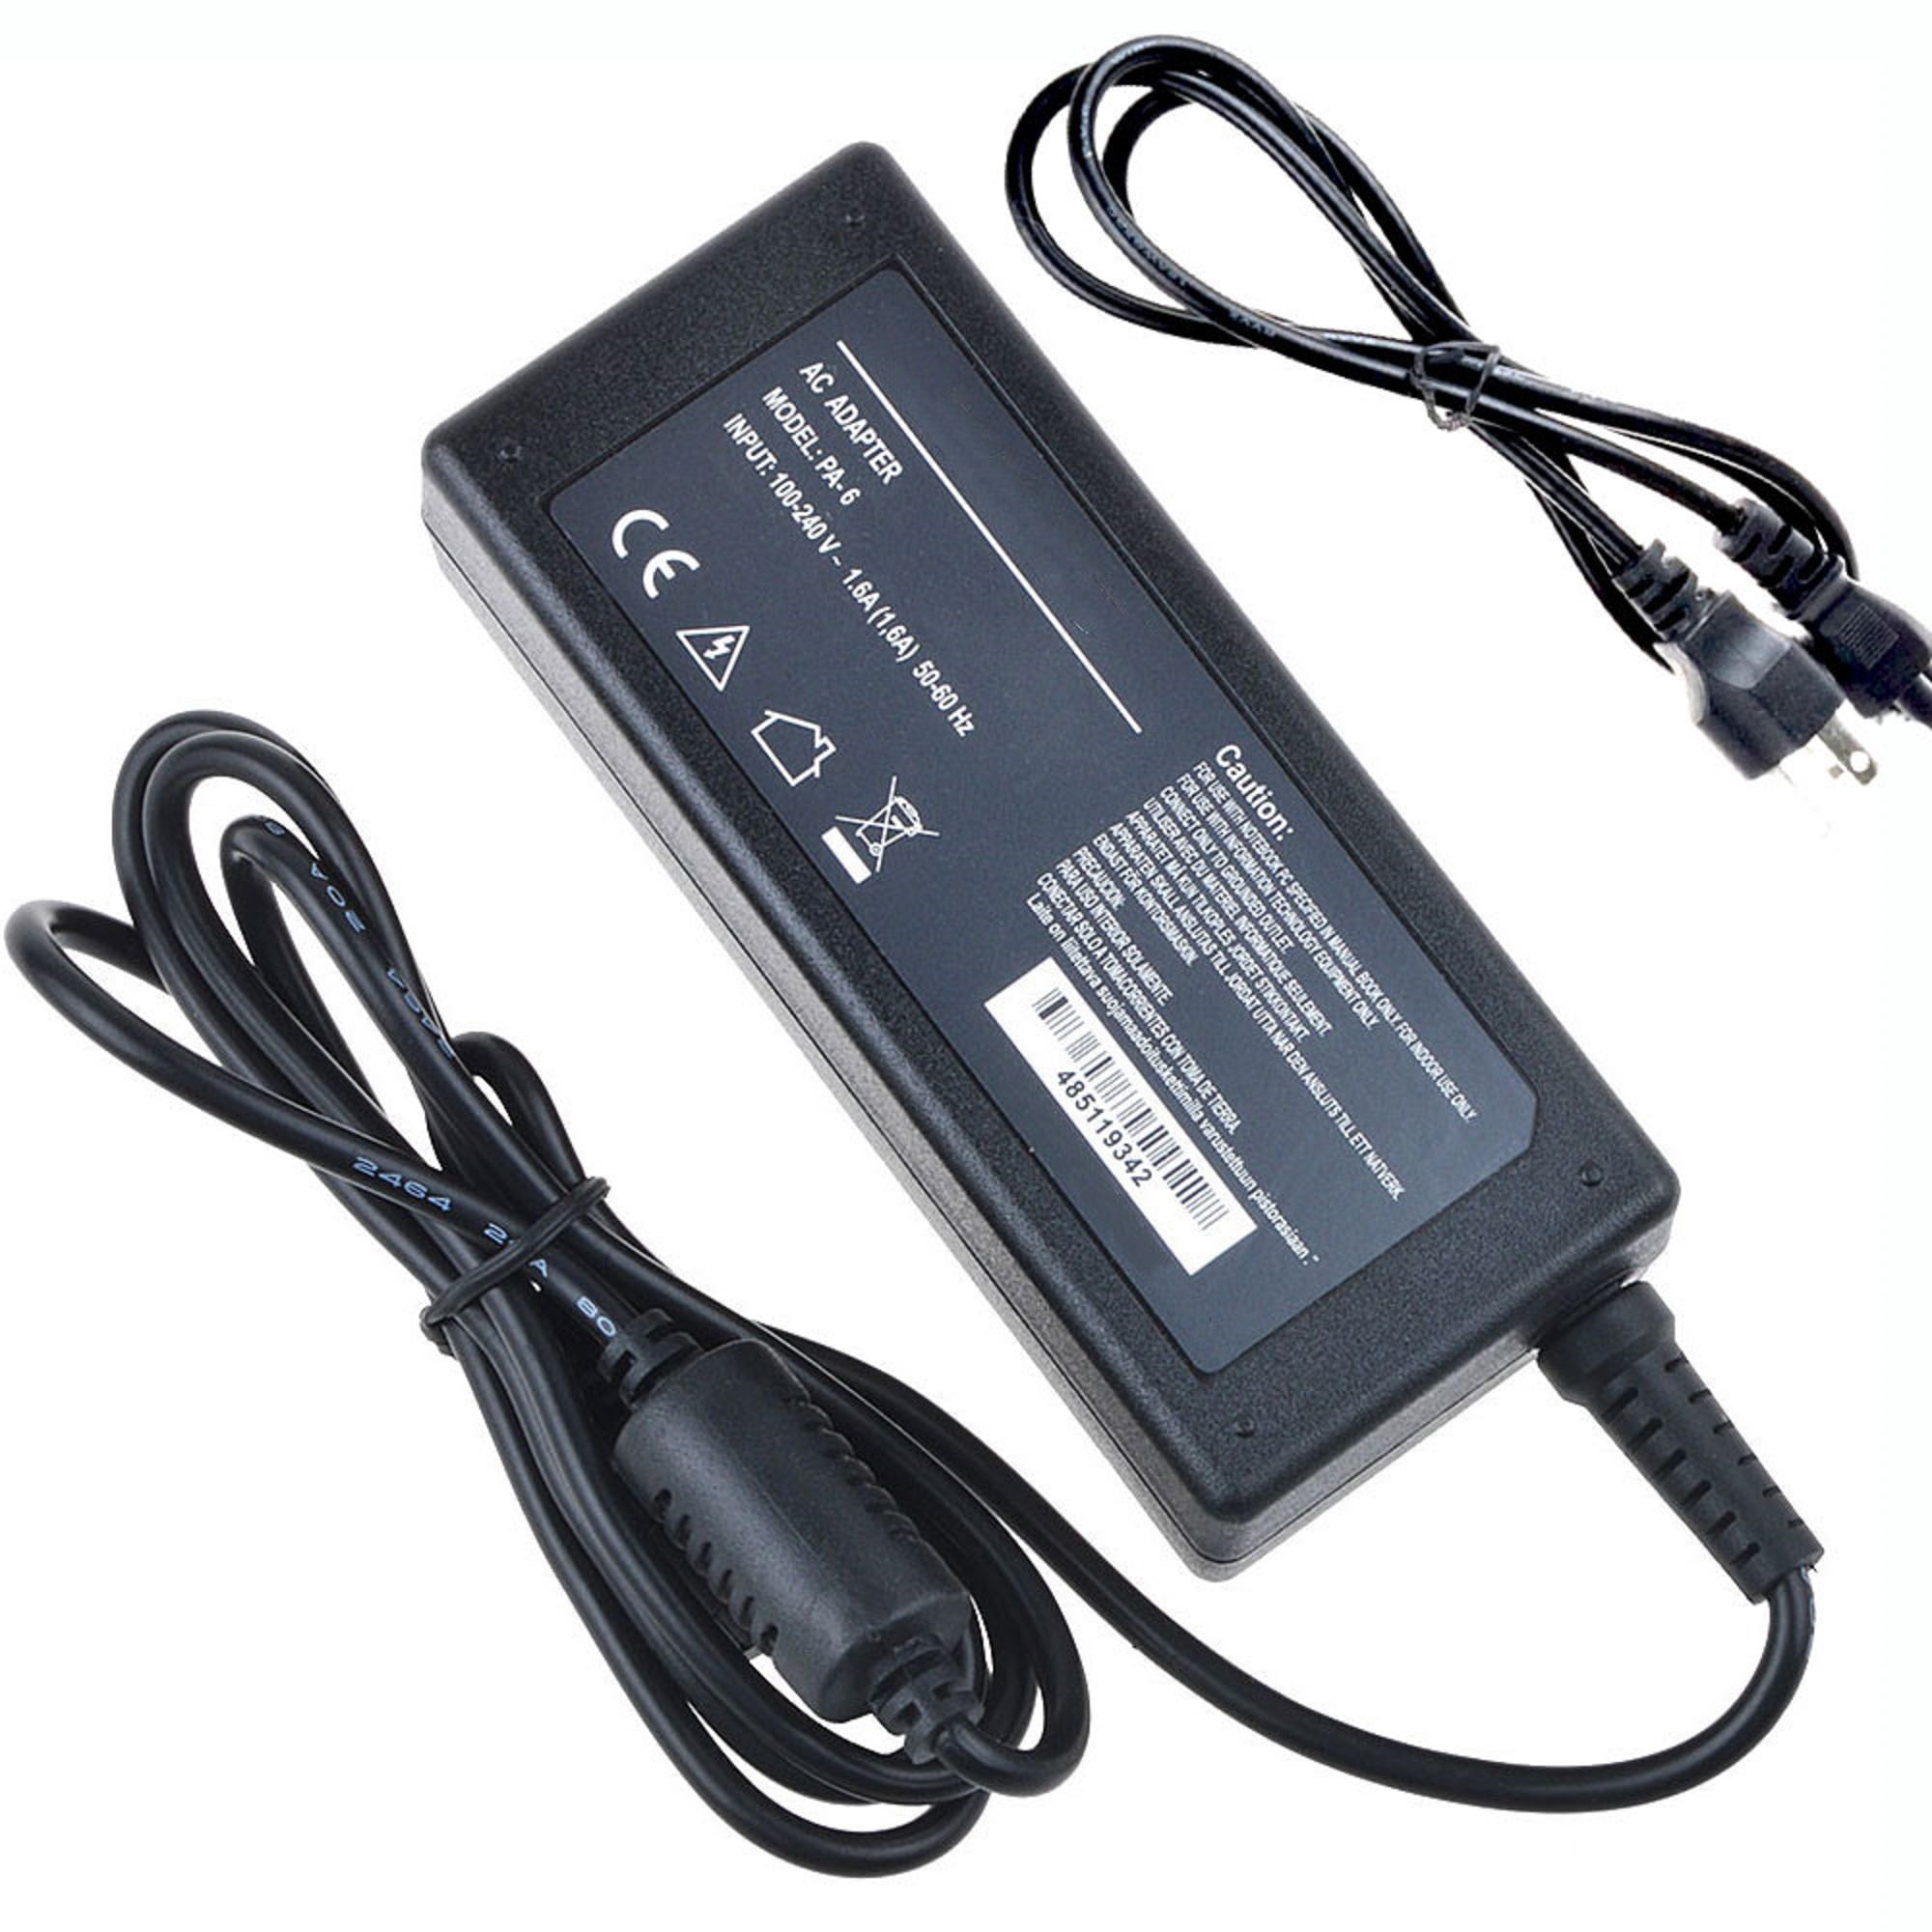 AC/DC Power Adapter Charger for Delphi SA10221 XM Sirius Satellite Radio Boombox 